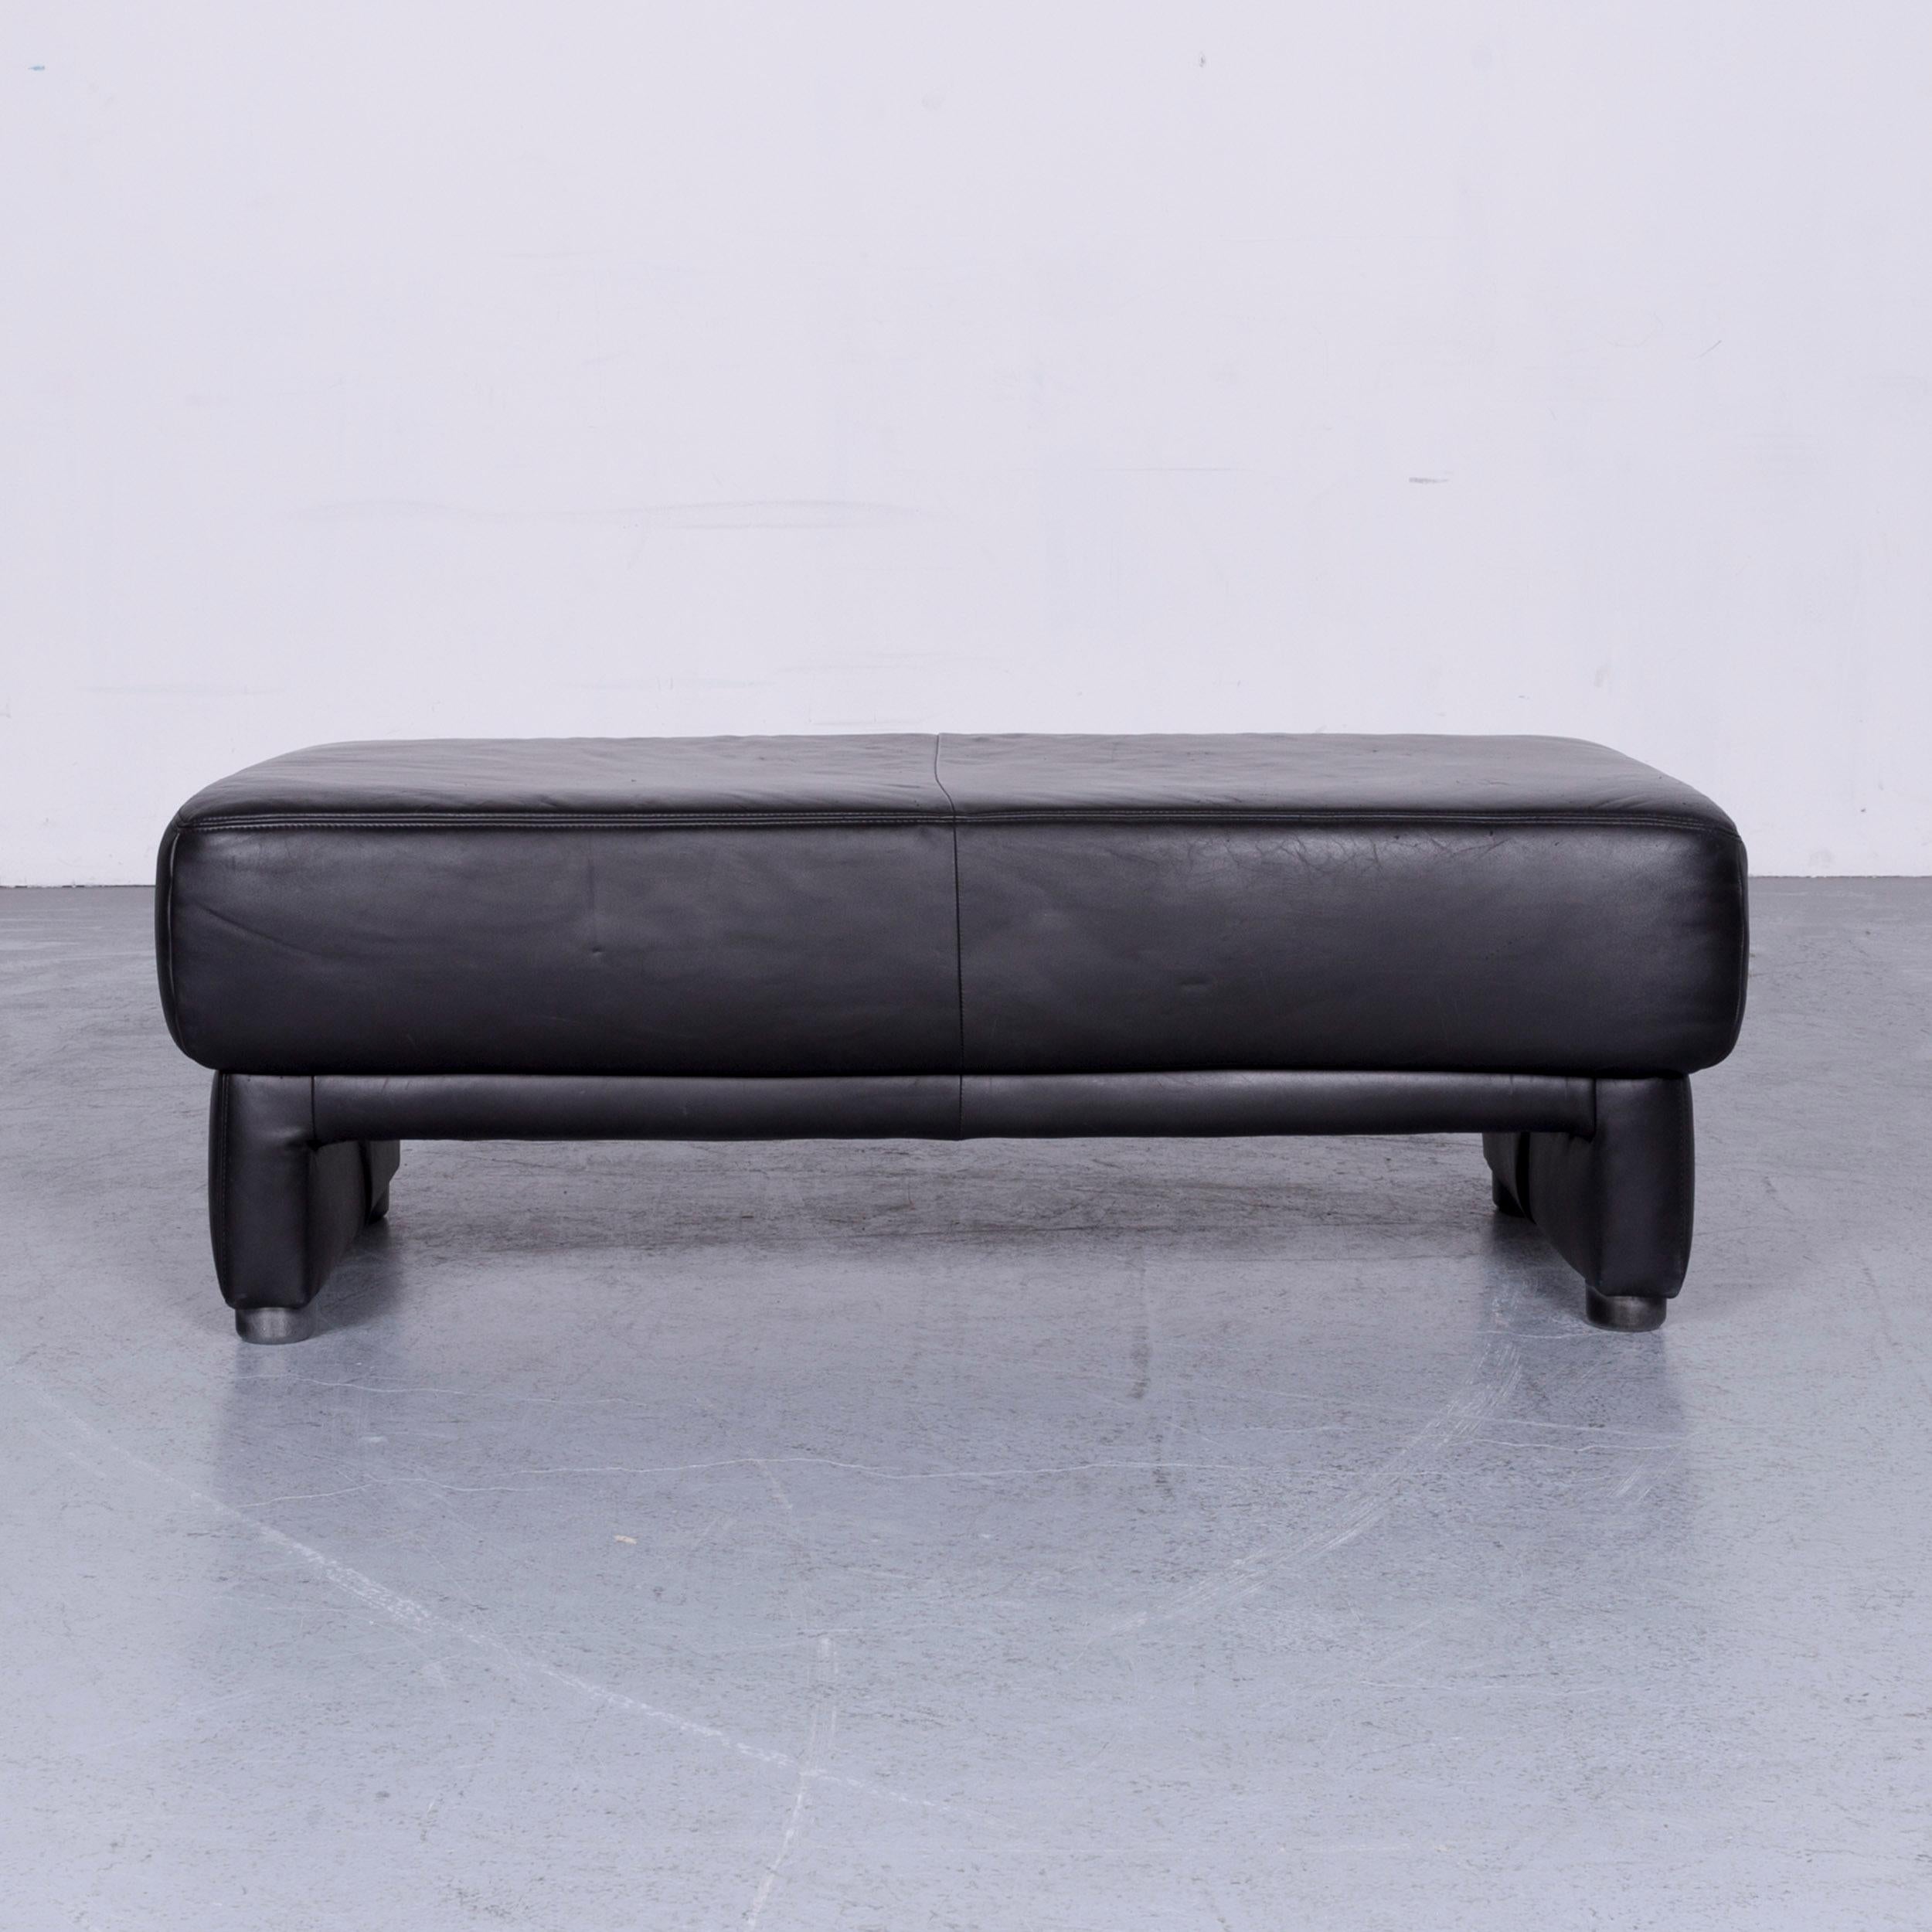 Koinor Designer Leather Sofa Black Two-Seat Couch 12